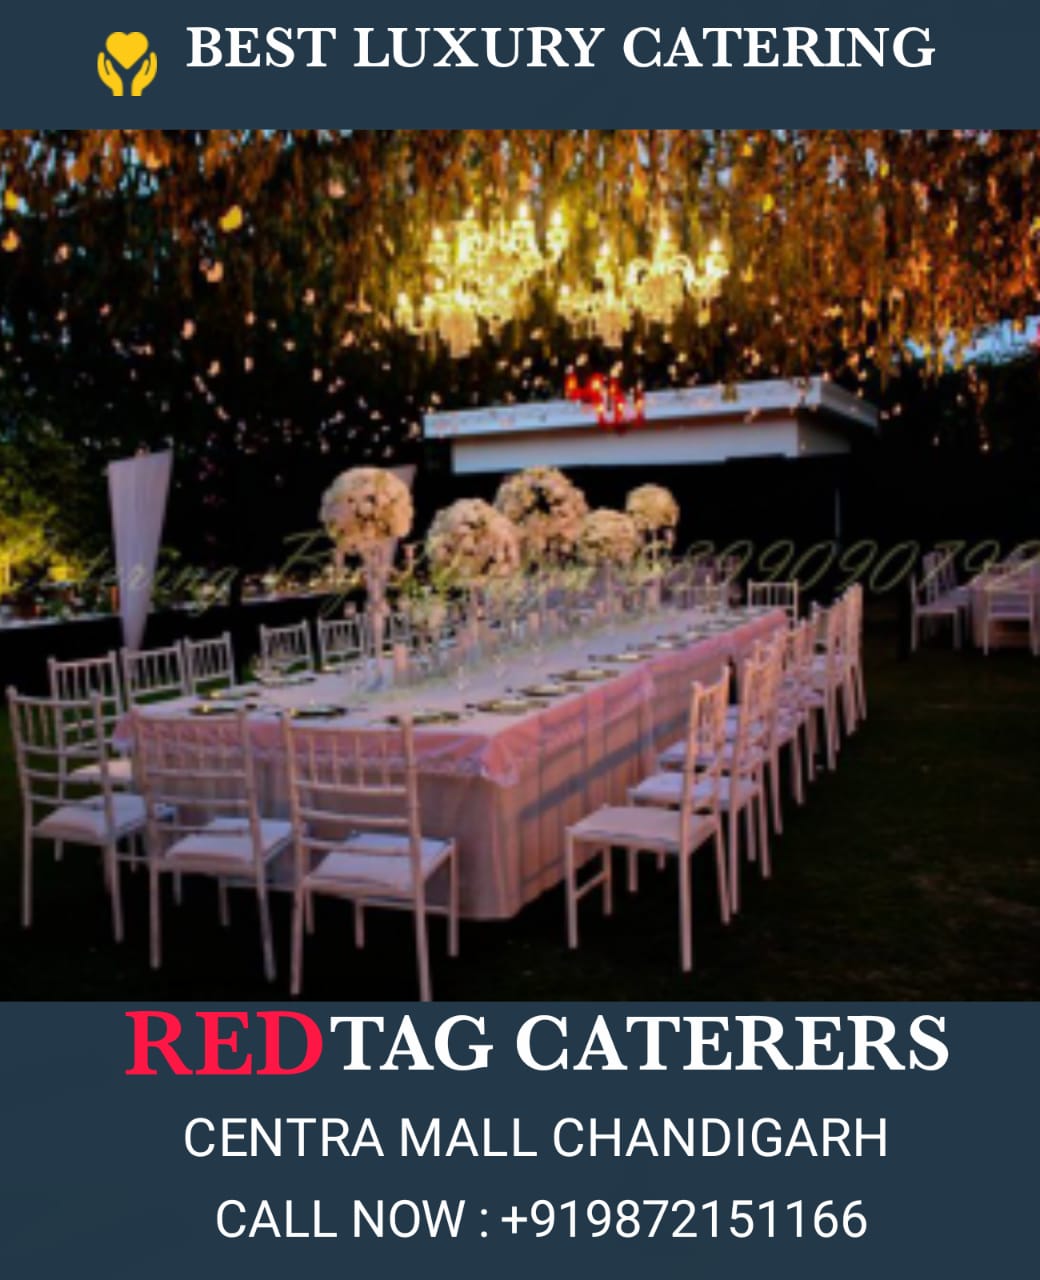 Expert outdoor and complete catering service in Mohali punjab. | Red Tag Caterers | Expert outdoor catering services in Mohali punjab, best quality catering services in Mohali punjab, luxury catering services in Mohali punjab, top quality catering services in Mohali punjab, best - GL46766